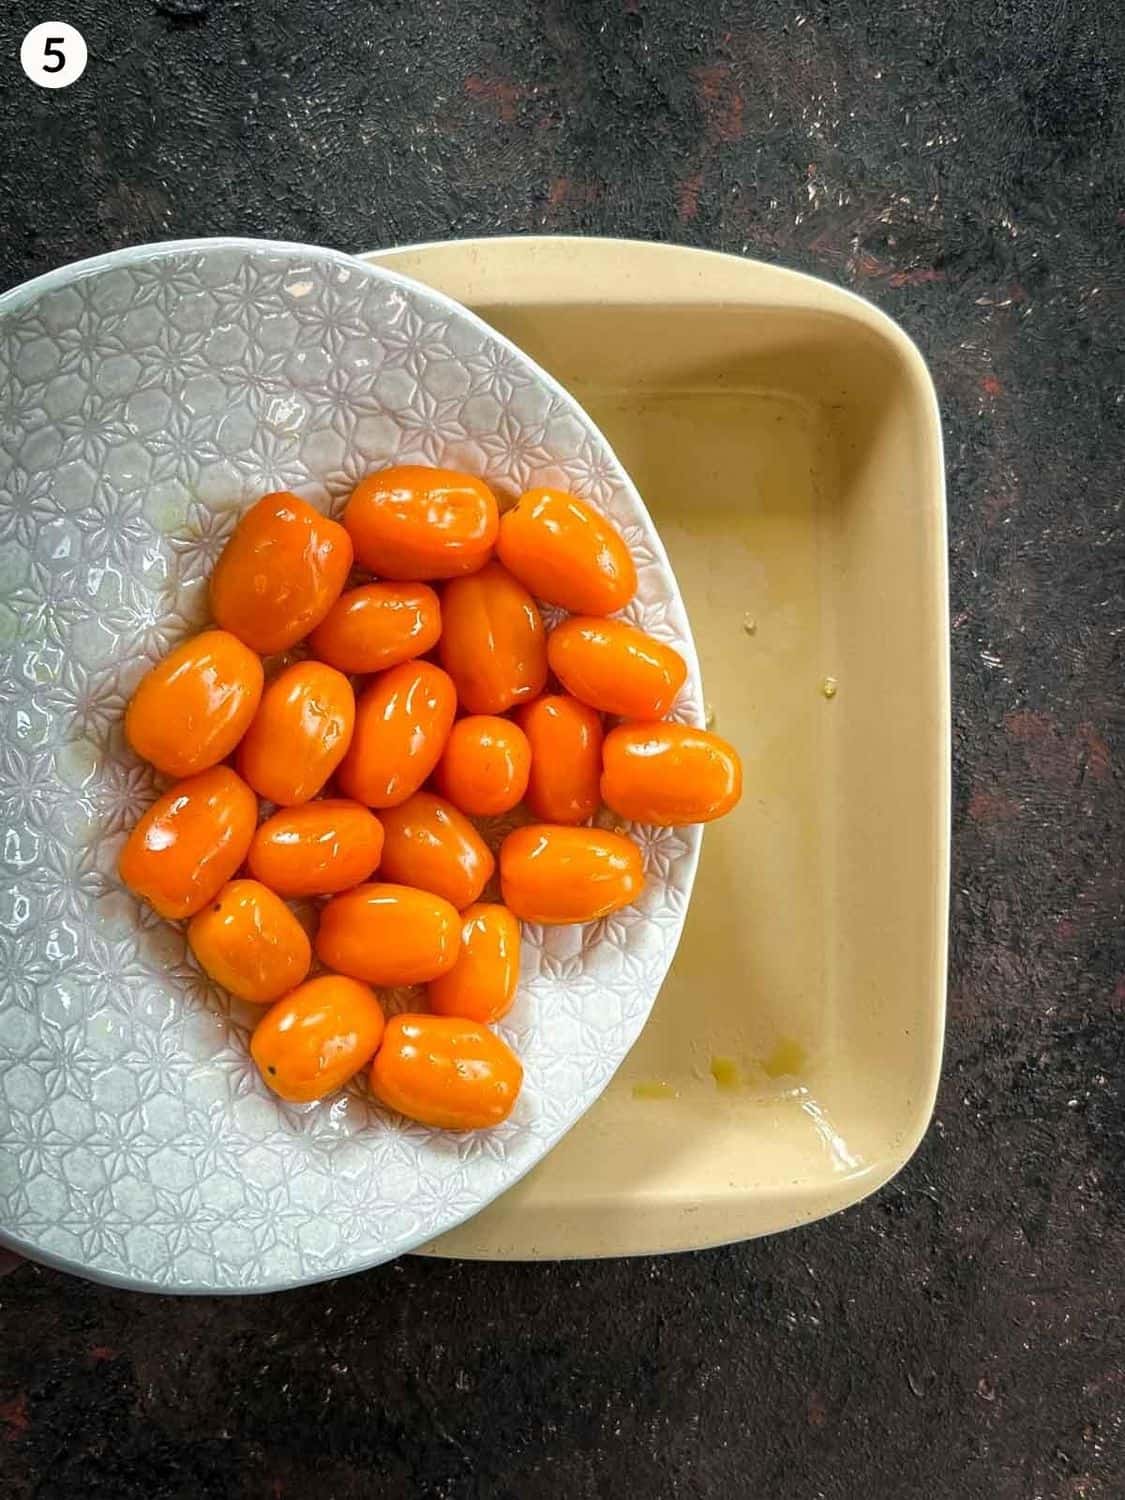 Adding orange grape tomatoes from a white bowl to an oiled baking dish